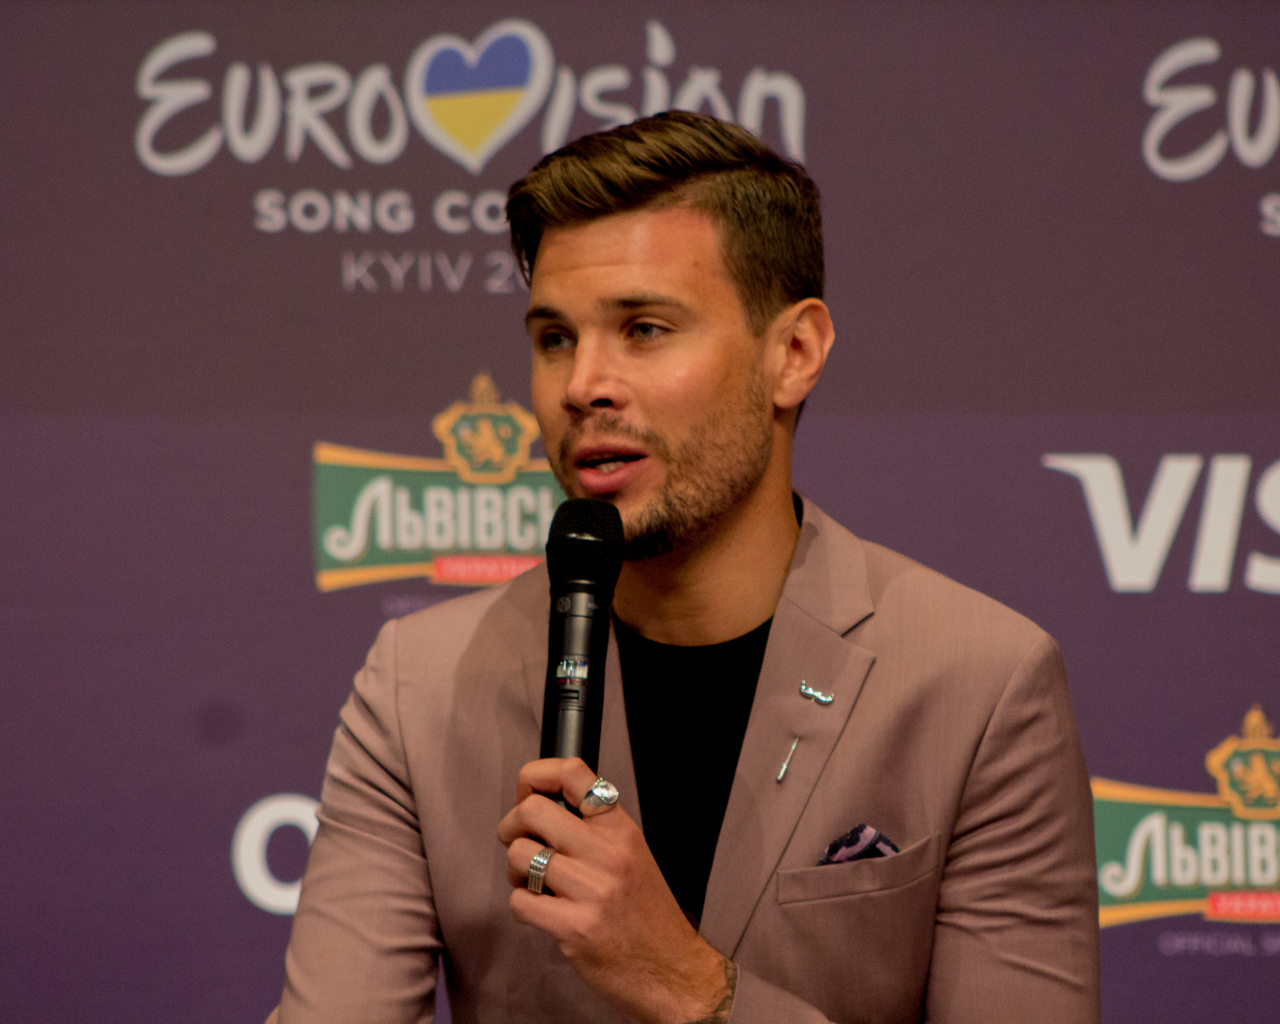 Eurovision Song Contest 2017 in Kiev from Sweden Robin Bengtsson